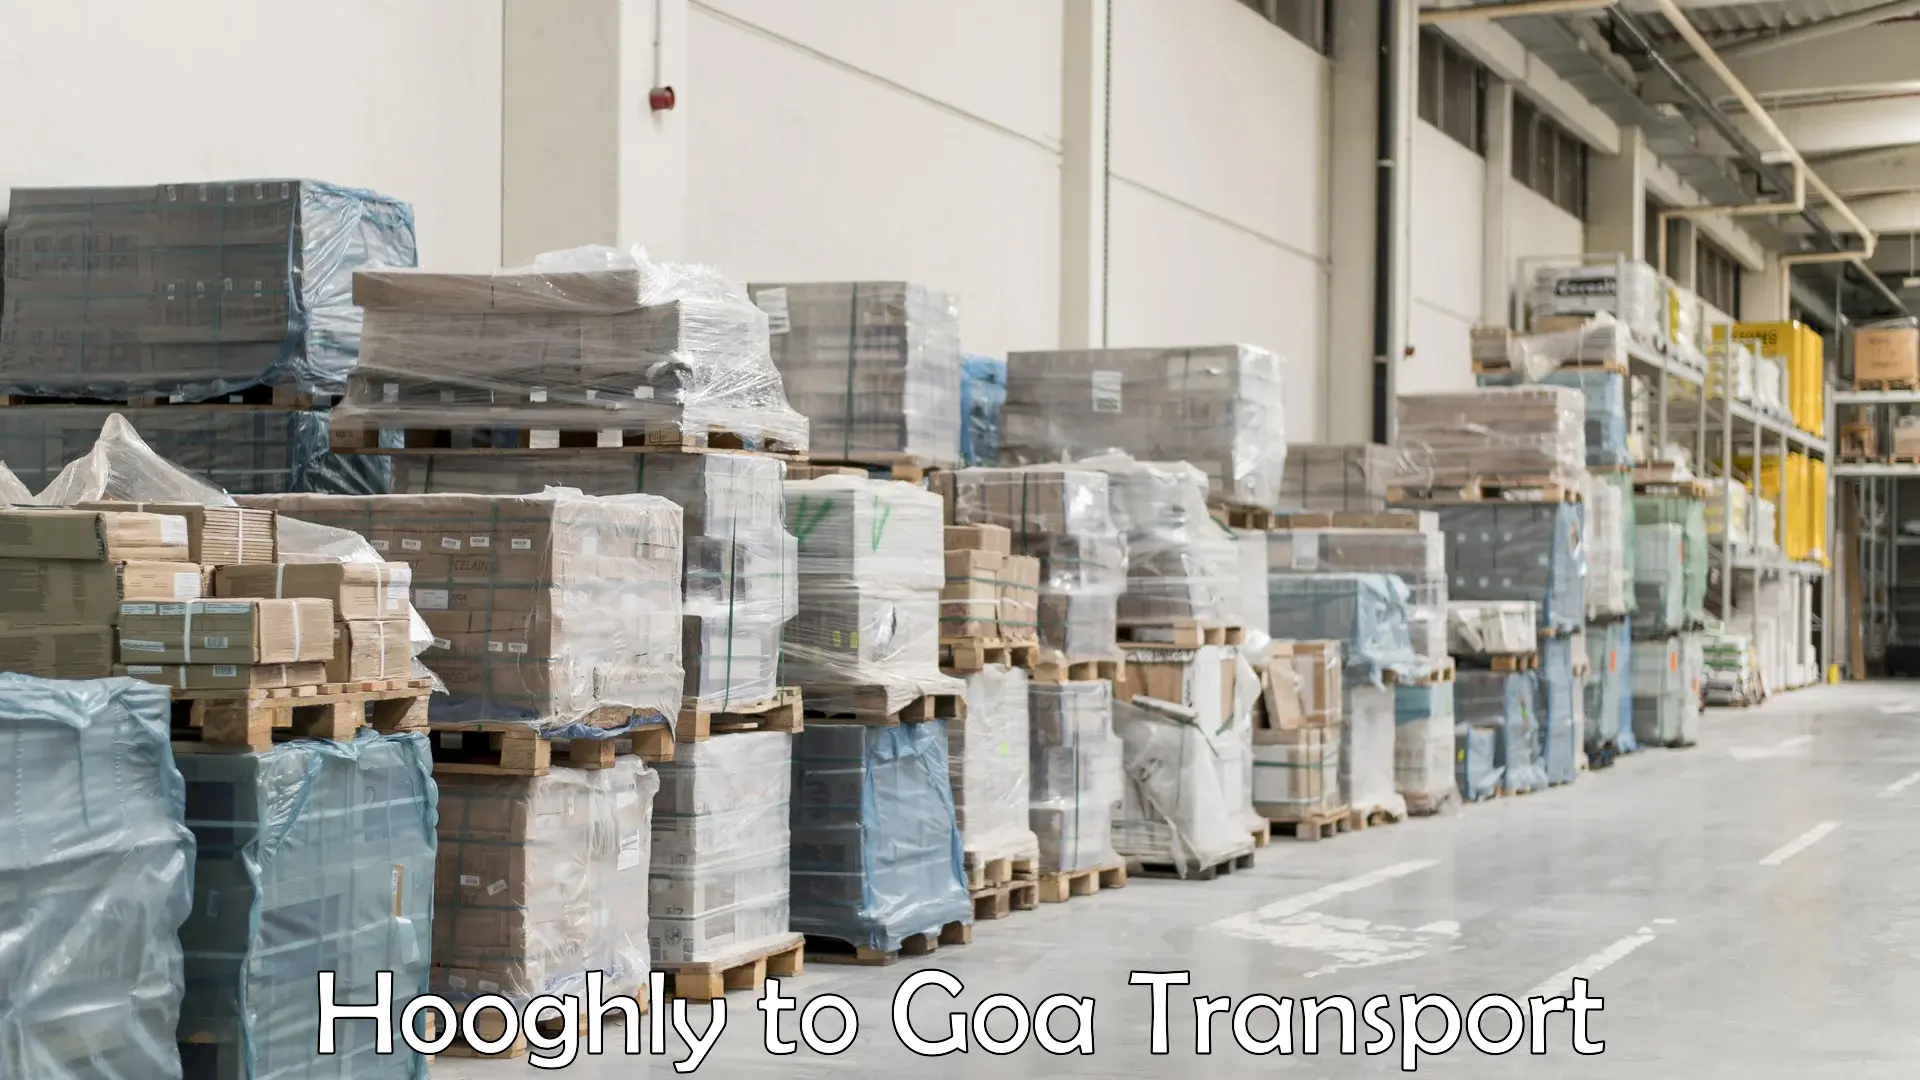 Goods delivery service Hooghly to Vasco da Gama